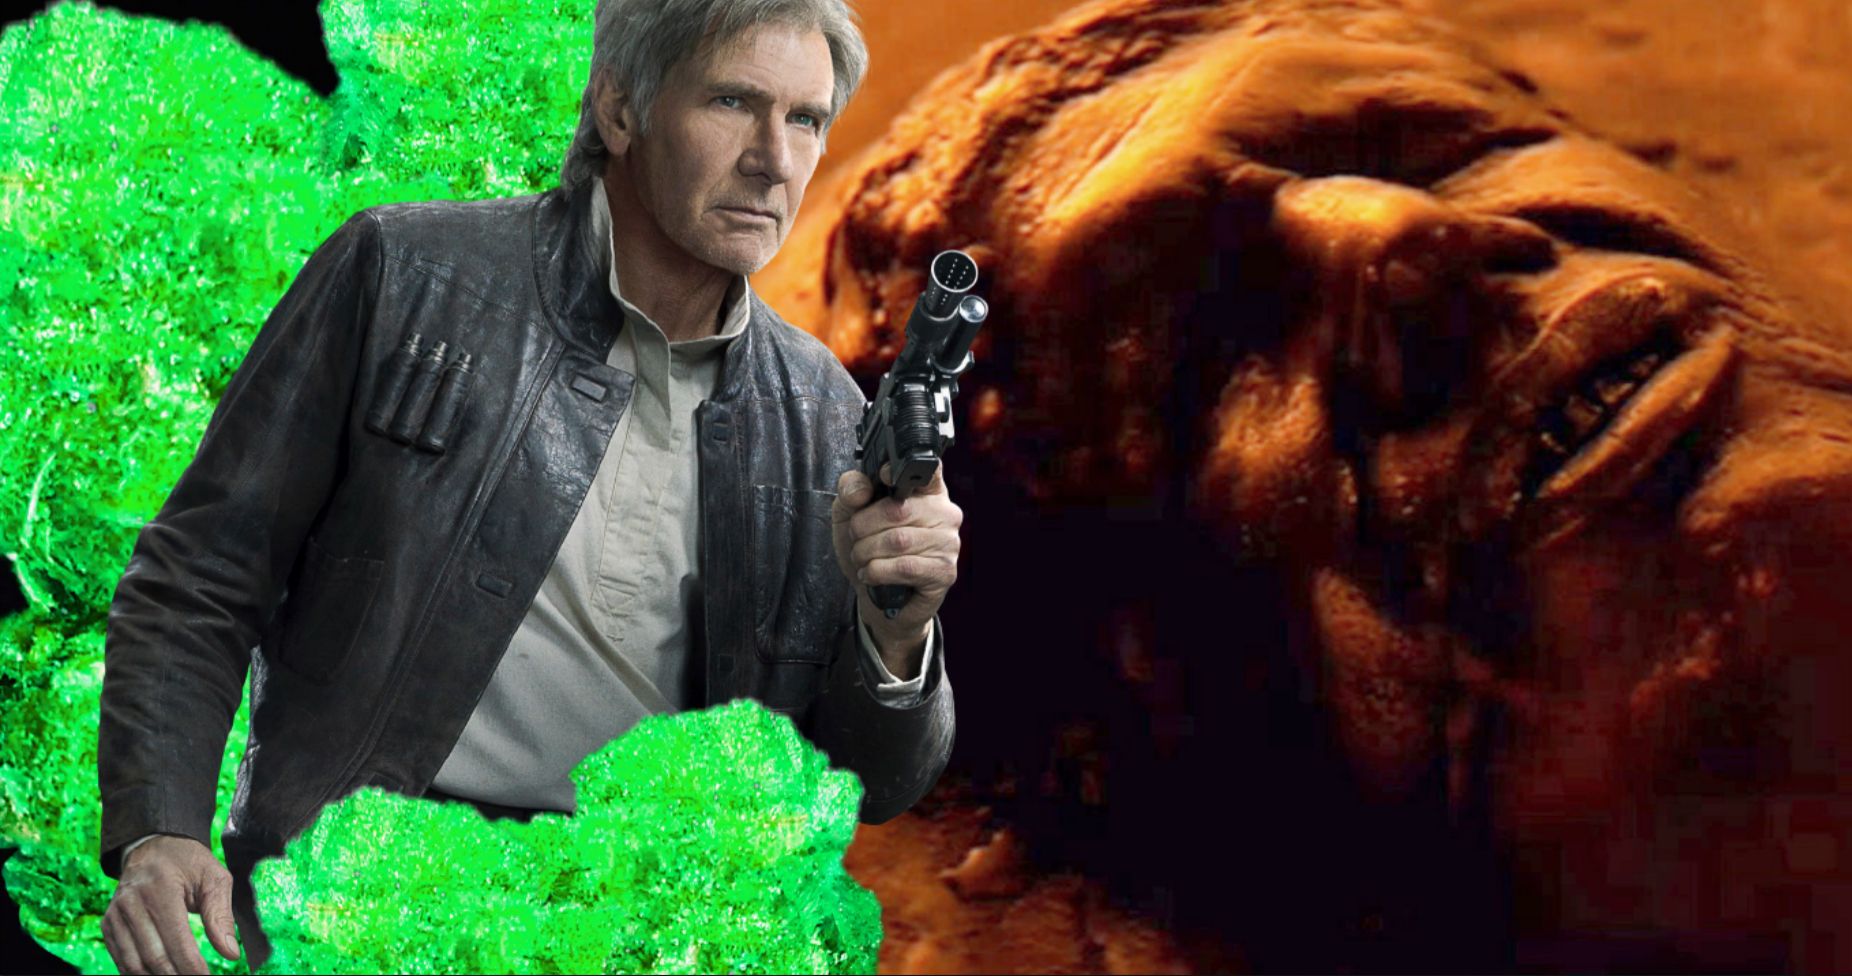 Harrison Ford Mistakes Carbonite for Kryptonite, But He Knows We Still Love Him